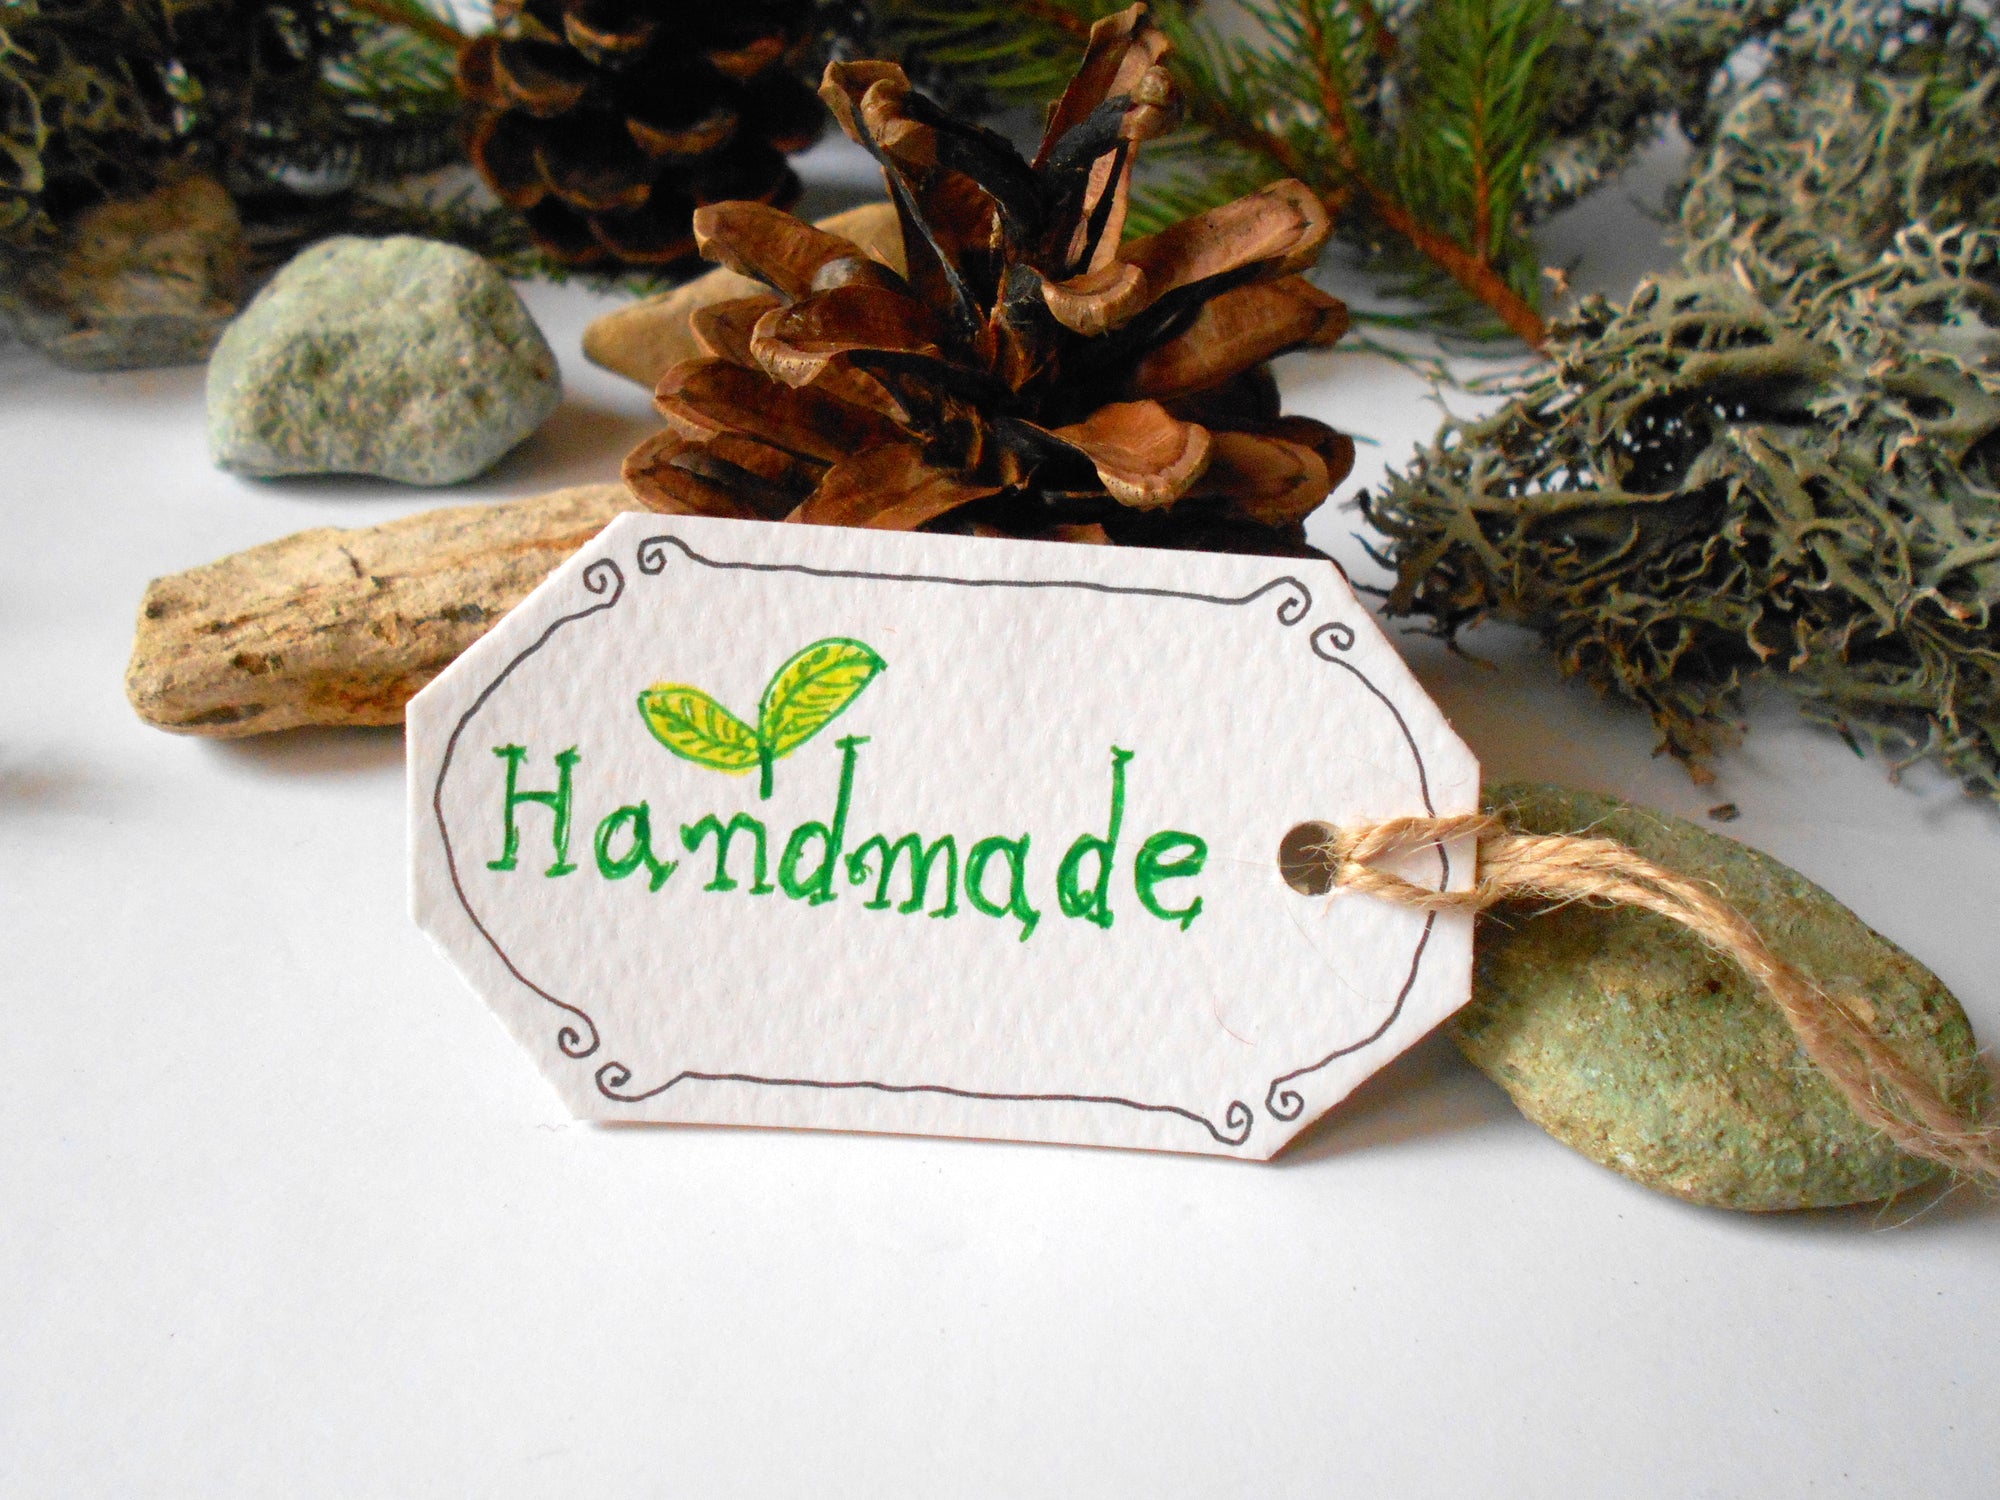 Handmade hang tag with hand-written handmade word on it and surrounded by a pine branch, pine cone, stones and lichen 